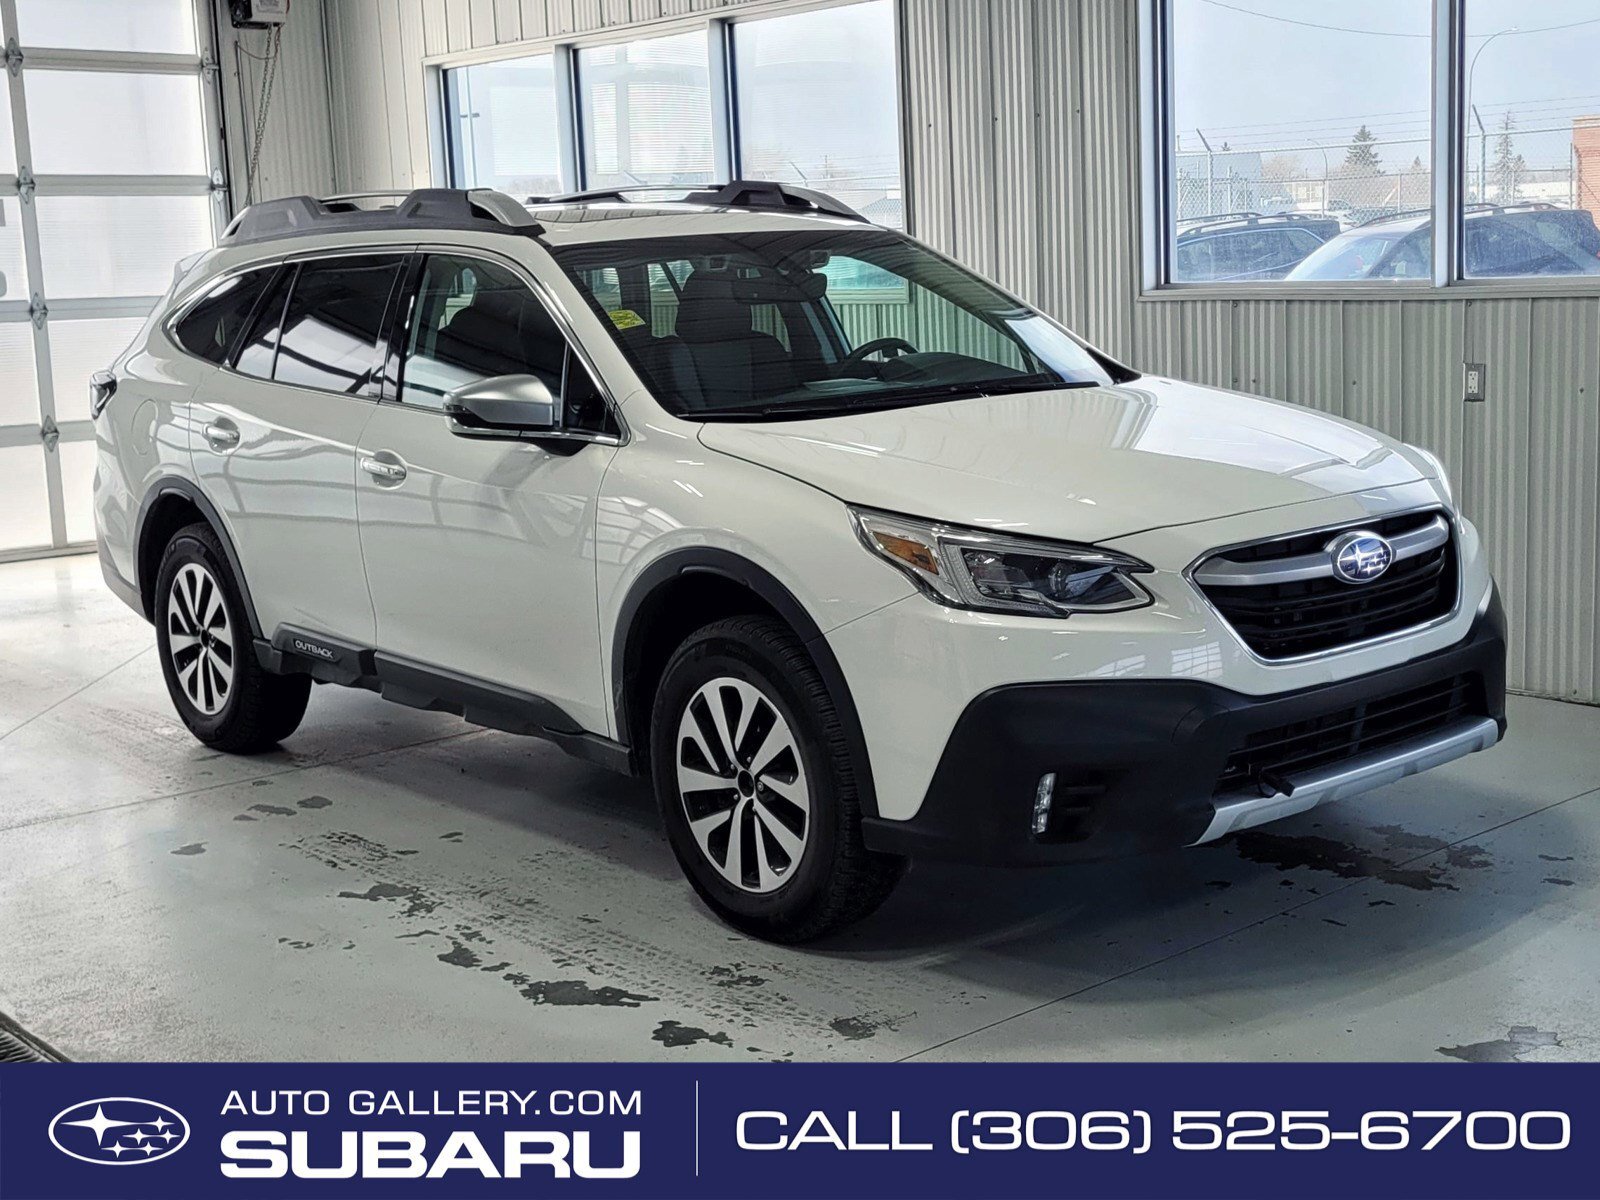 2022 Subaru Outback Premier AWD | FULLY LOADED | BROWN LEATHER